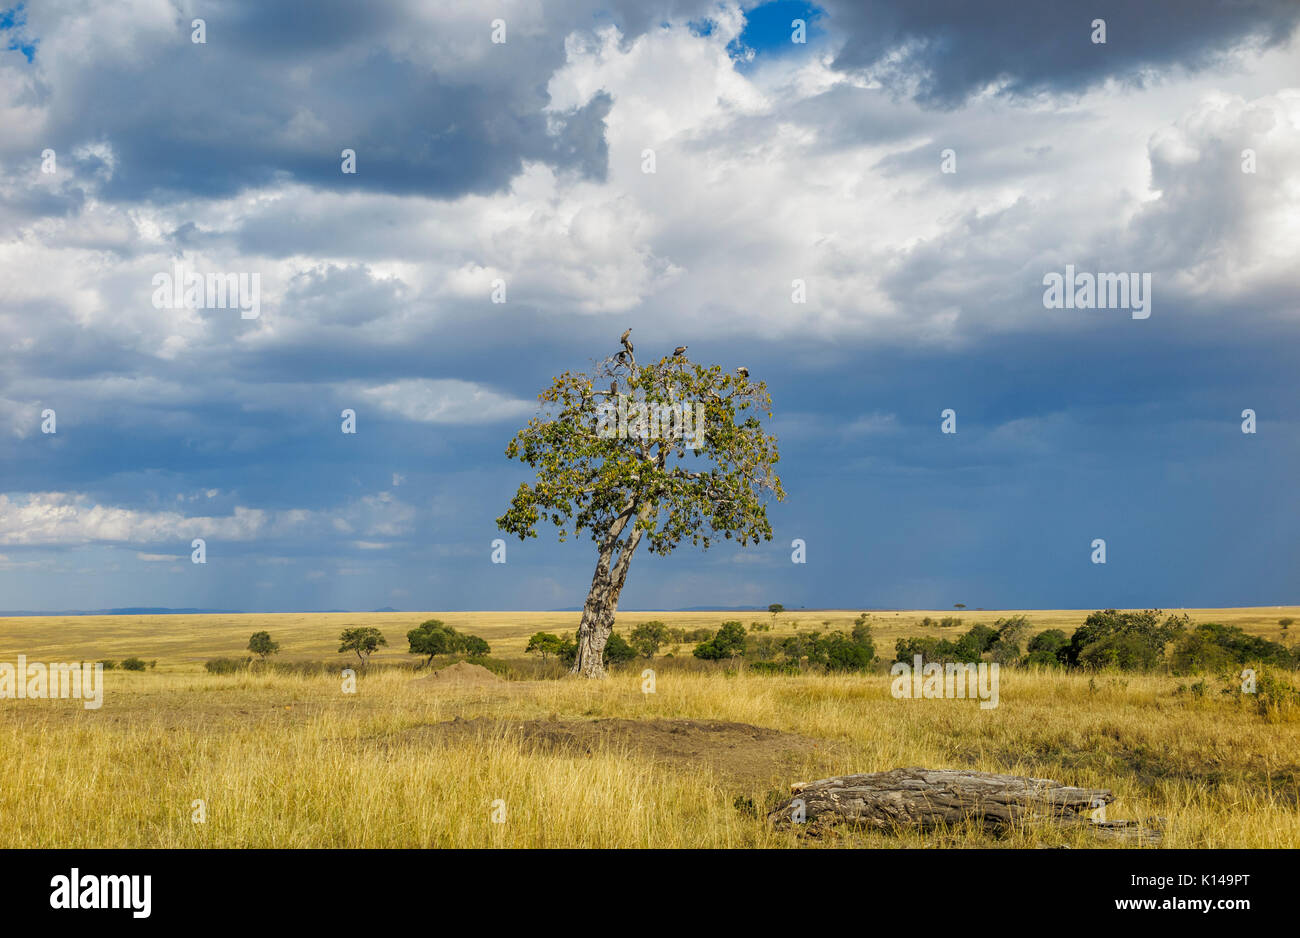 Landscape in savannah grassland in Masai Mara, Kenya with vultures perching in a tree against a cloudy sky with approaching rain clouds Stock Photo